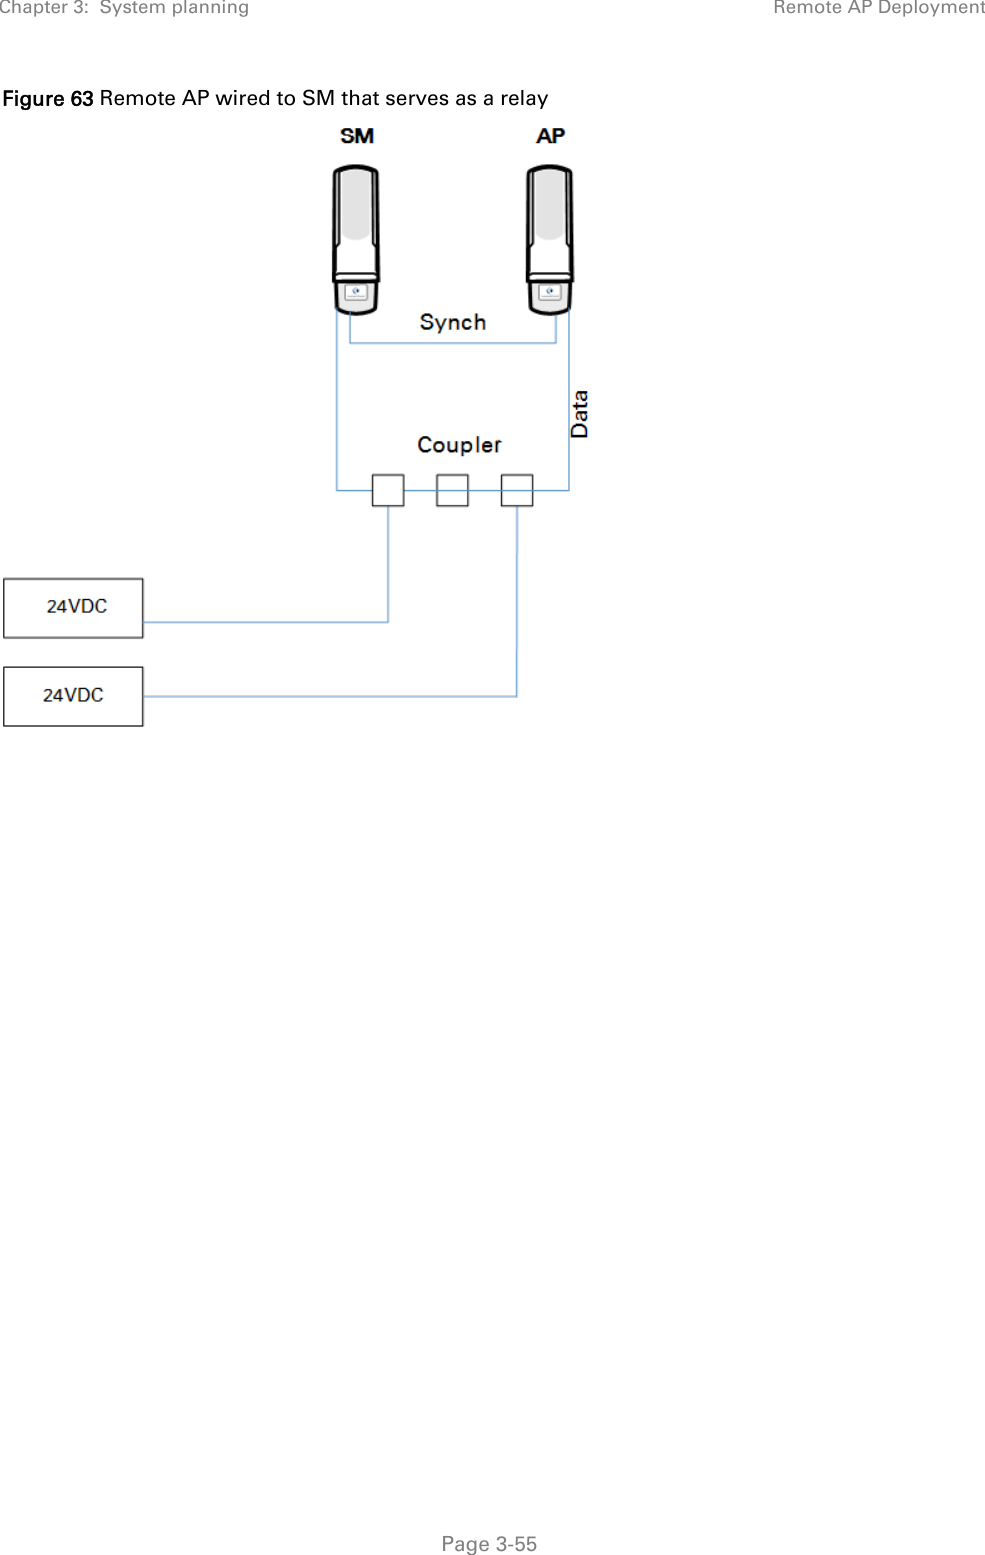 Chapter 3:  System planning  Remote AP Deployment   Page 3-55 Figure 63 Remote AP wired to SM that serves as a relay    